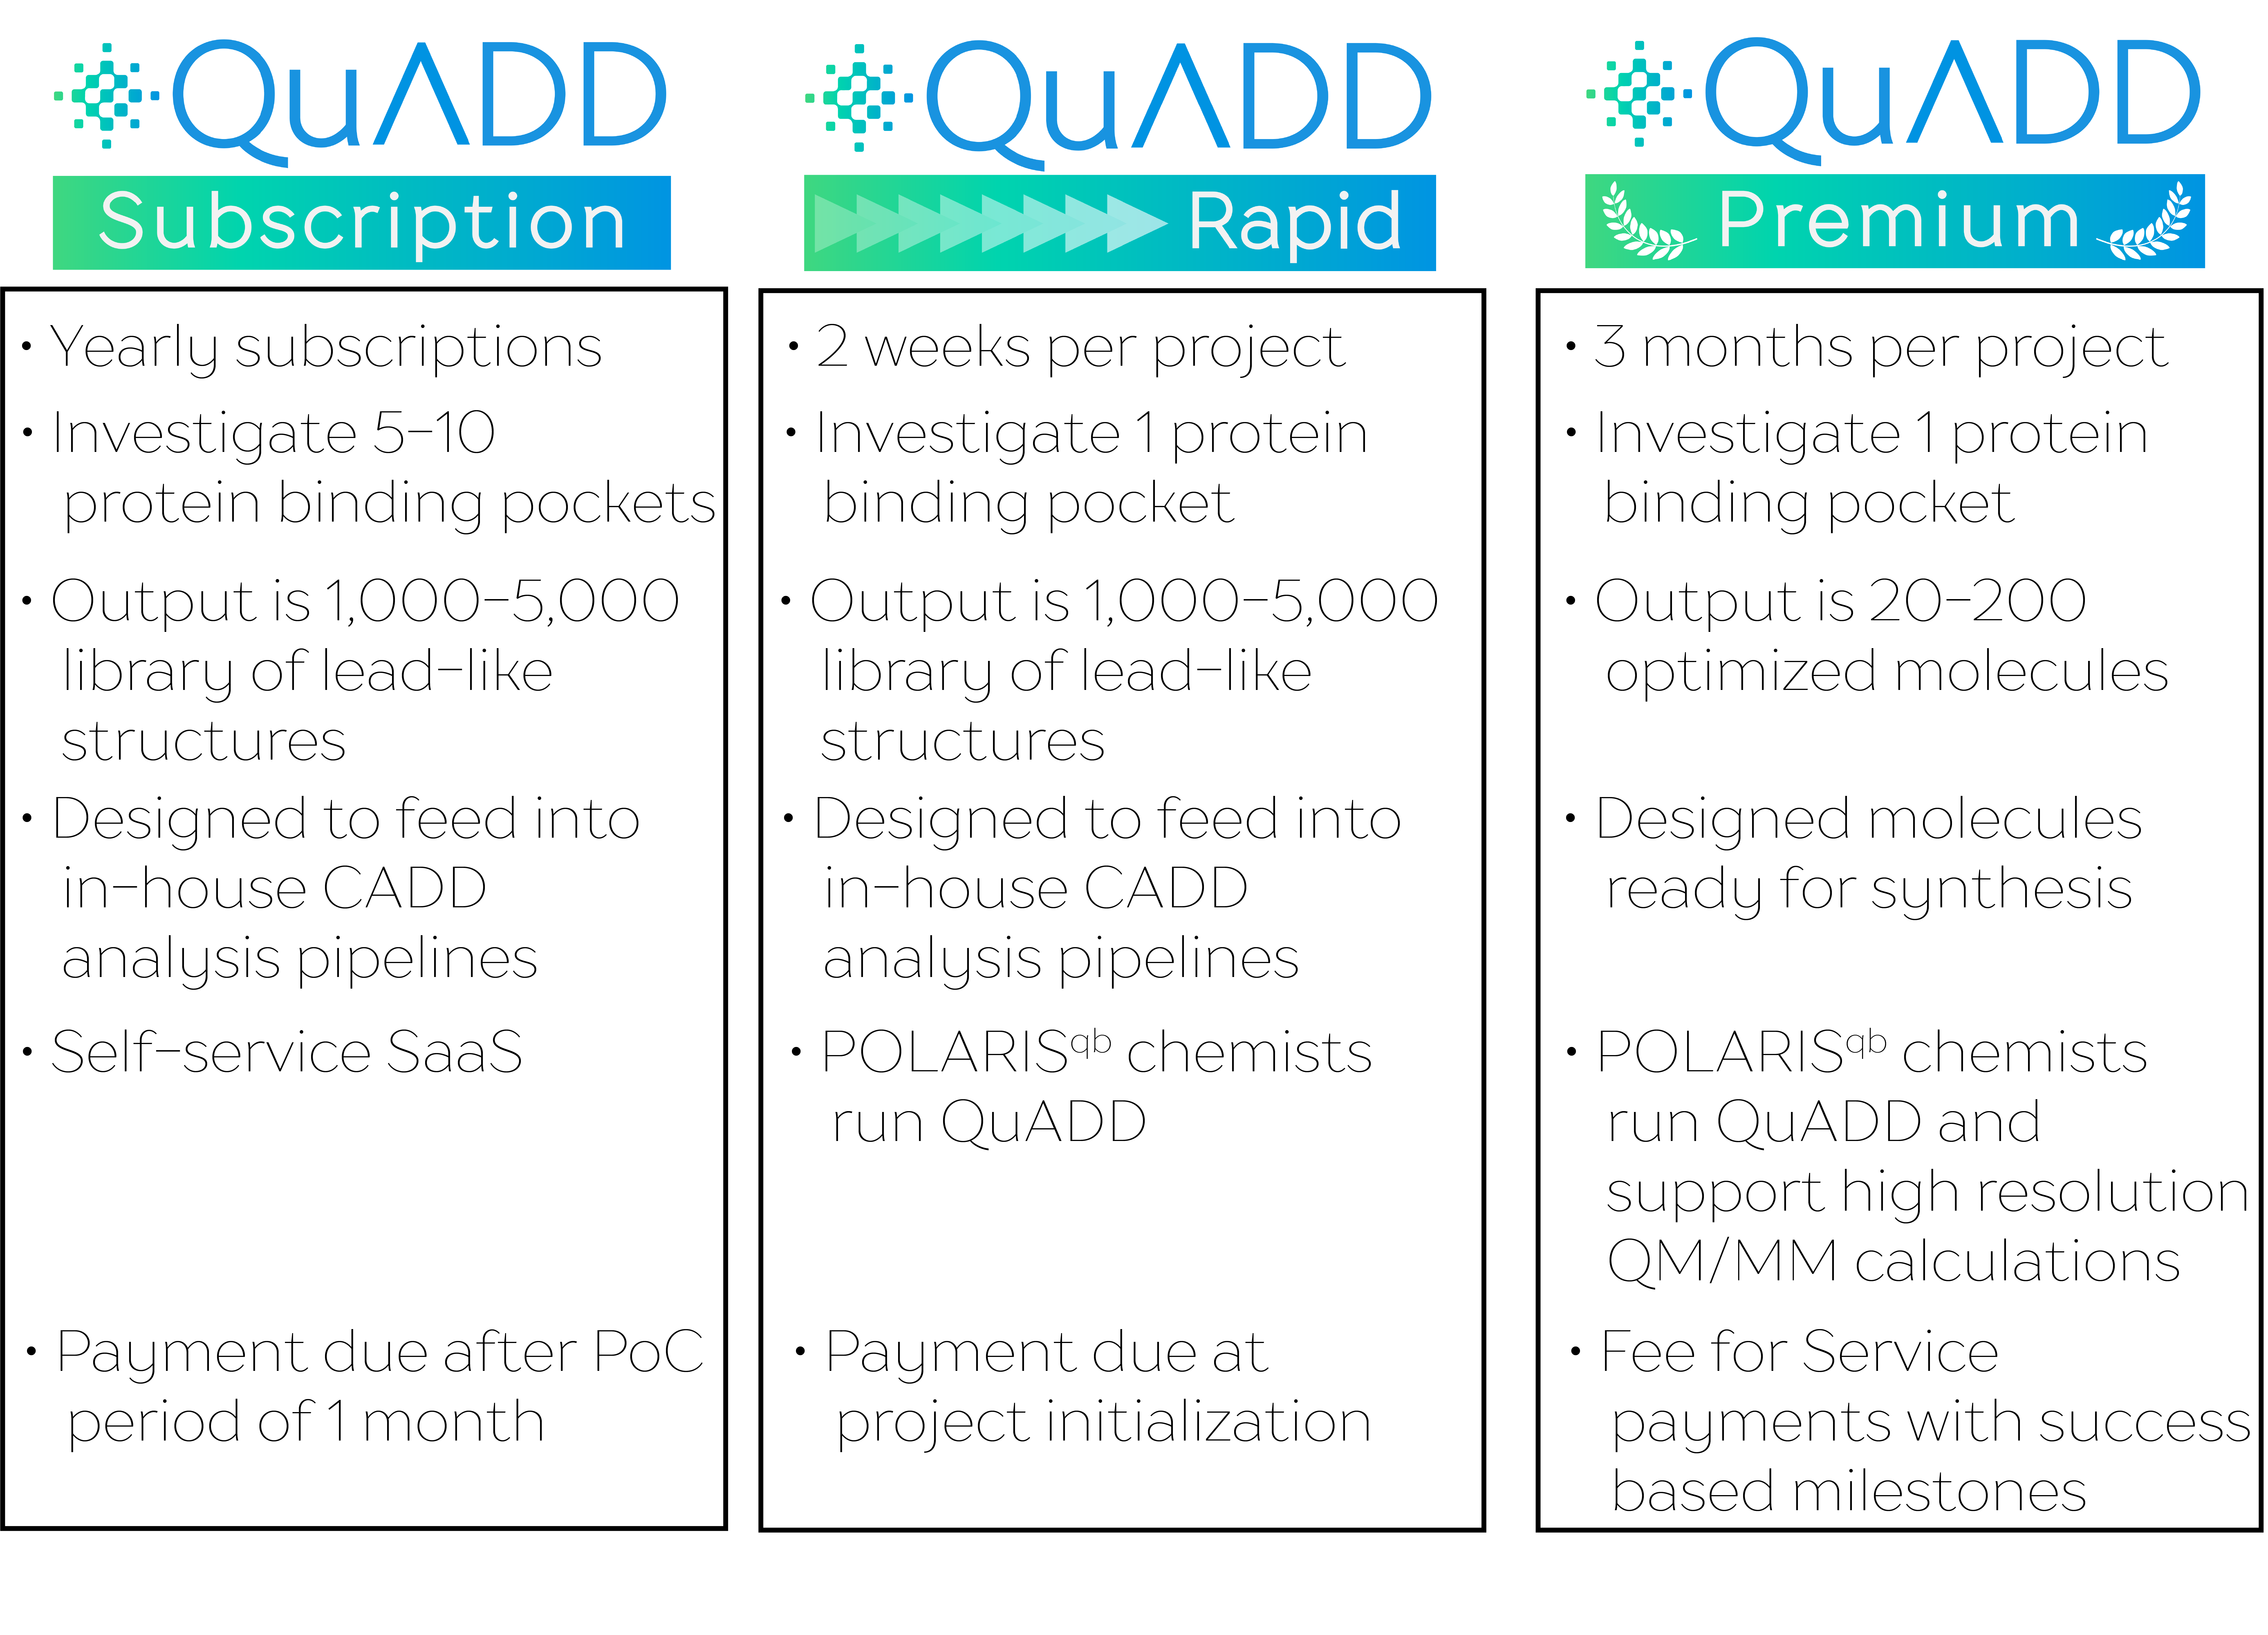 QuADD Subscription • Yearly subscriptions • Investigate 5-10 protein binding pockets •Output is 1,000-5,000 library of lead-like structures •Designed to feed into in-house CADD analysis pipelines • Self-service SaaS • Payment due after PoC period of 1 month QuADD Rapid • 2 weeks per project • Investigate 1 protein binding pocket •Output is 1,000-5,000 library of lead-like structures •Designed to feed into in-house CADD analysis pipelines • POLARISqb chemists run QuADD • Payment due at project initialization QuADD Premium • 3 Months per Project • Investigate 1 protein binding pocket •Output is 20-200 optimized molecules •Designed molecules ready for synthesis • POLARISqb chemists run QuADD and support high resolution QM/MM calculations • Fee for Service payments with success based milestones